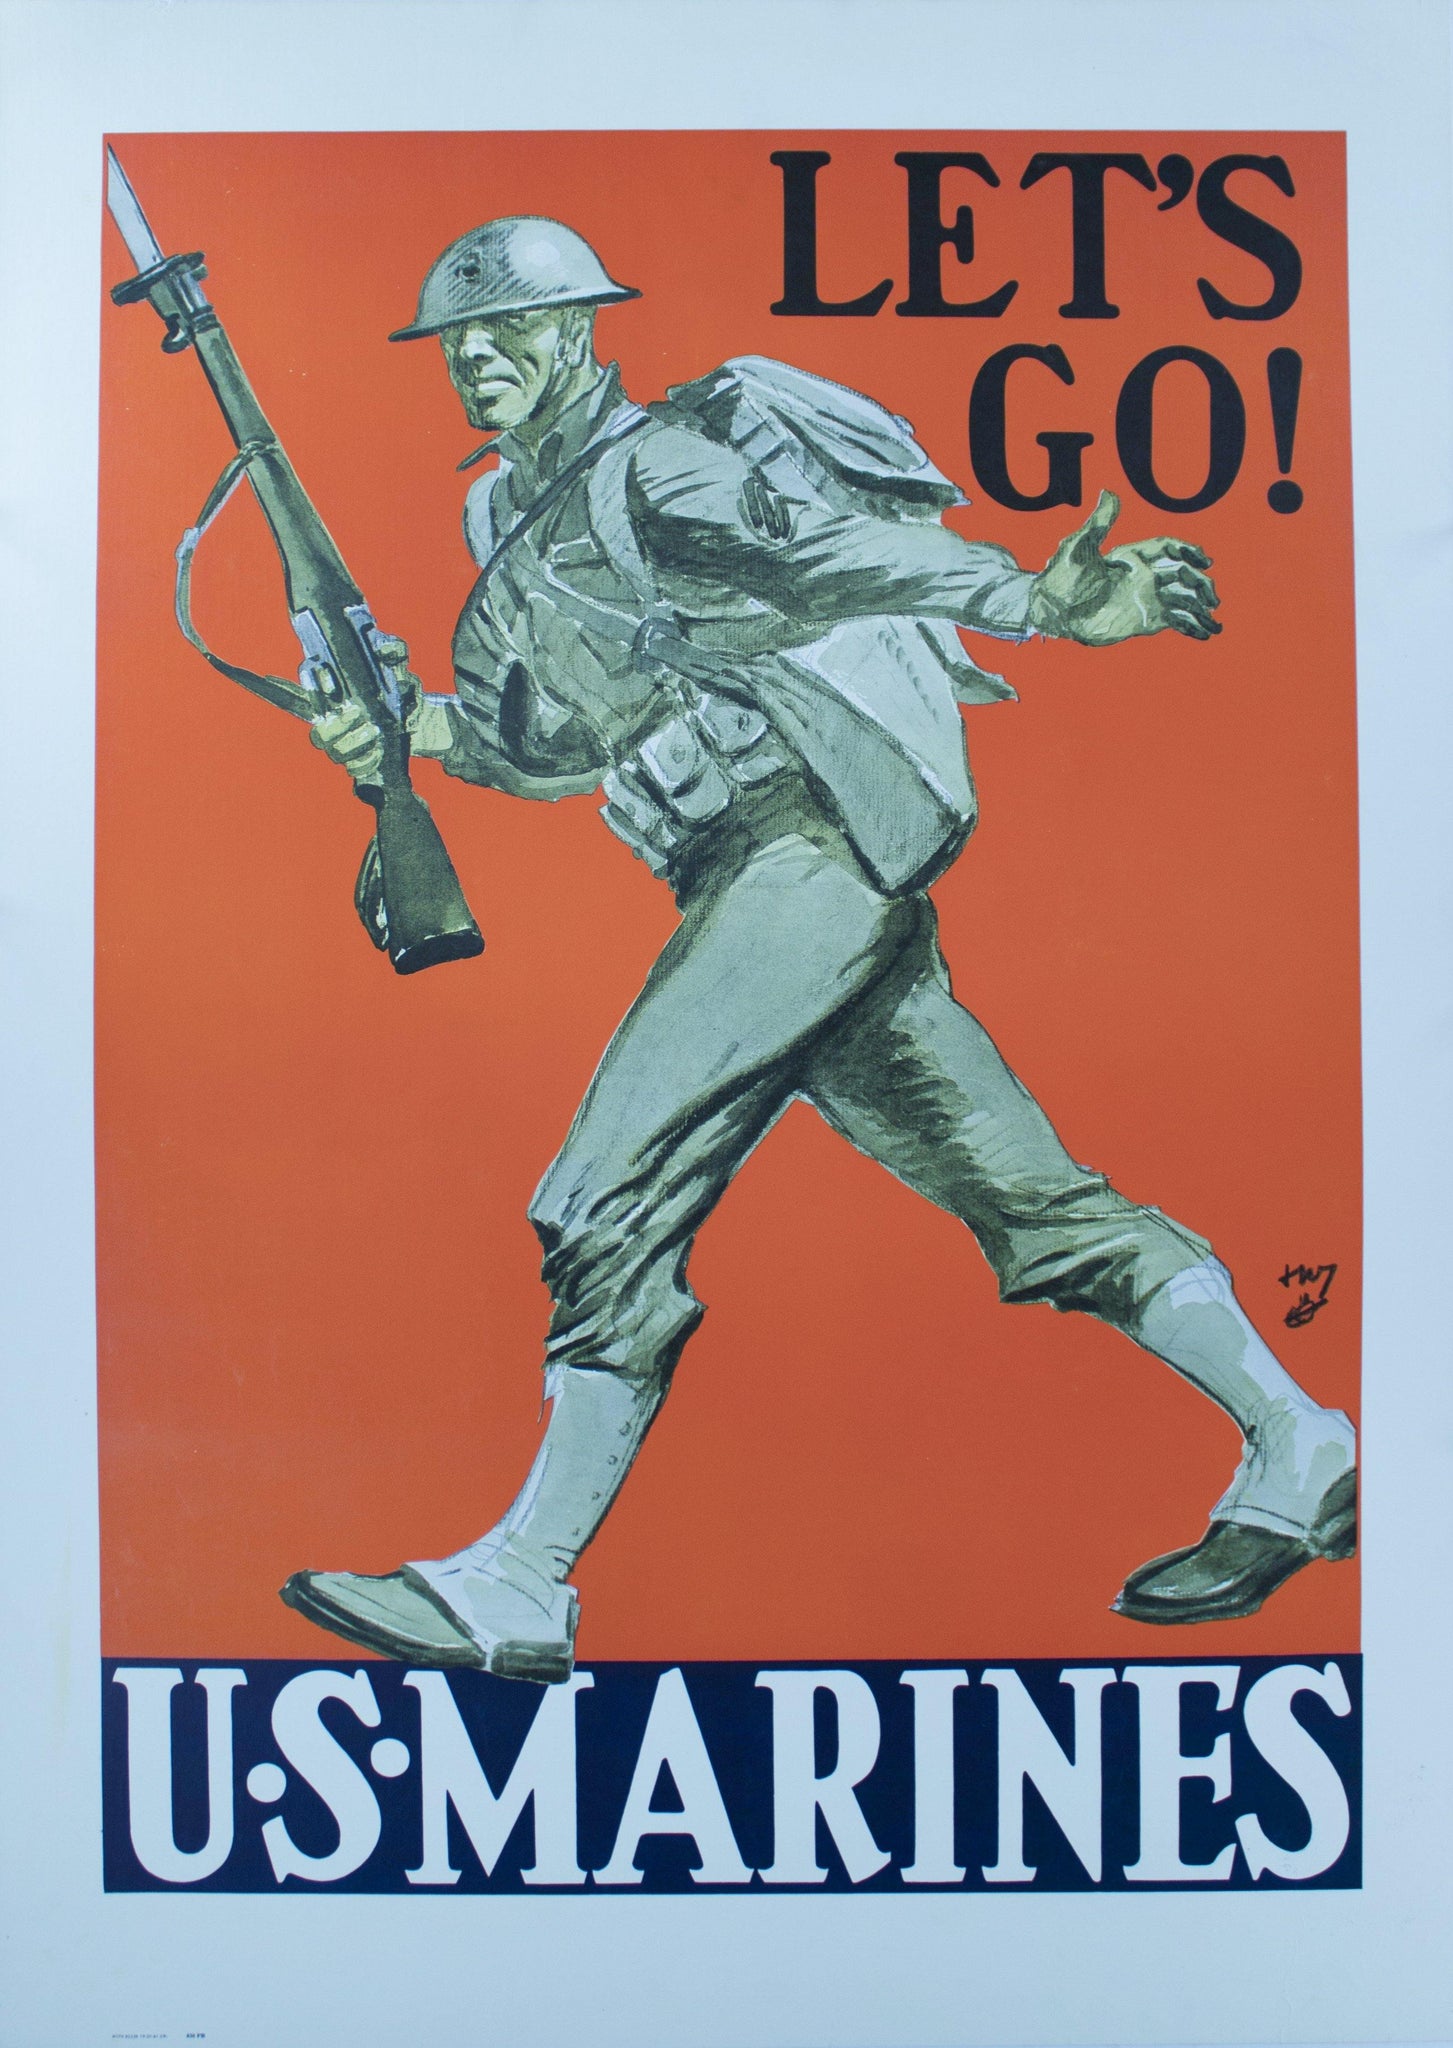 1941 Lets Go! U. S. Marines - Golden Age Posters